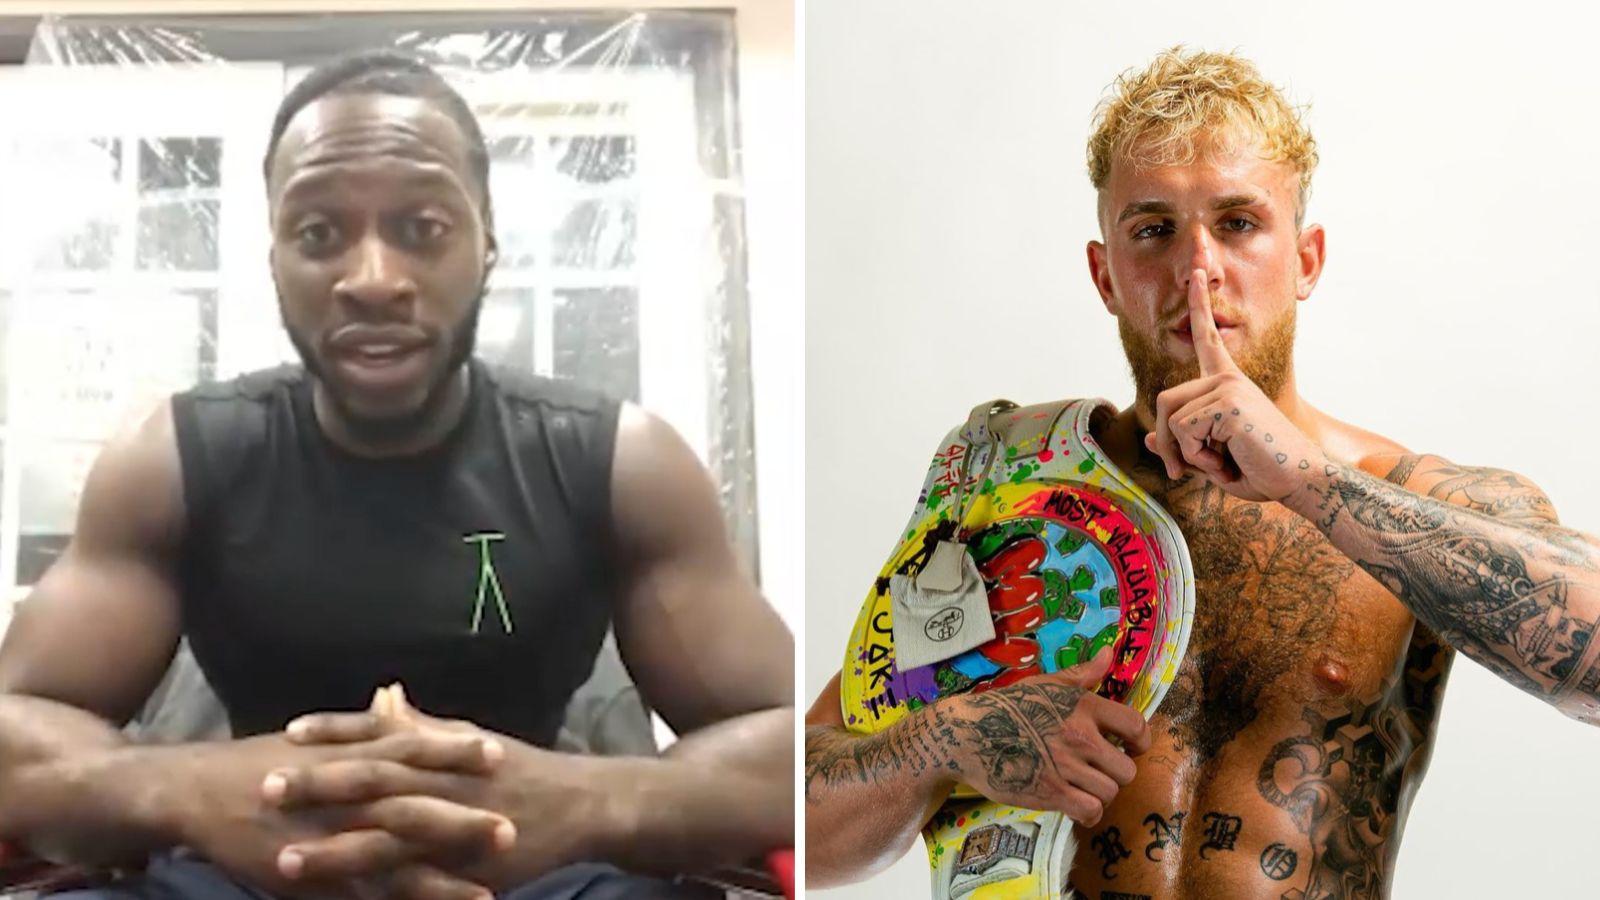 JustAMinx explains why MF & DAZN X Series 6 fight was canceled